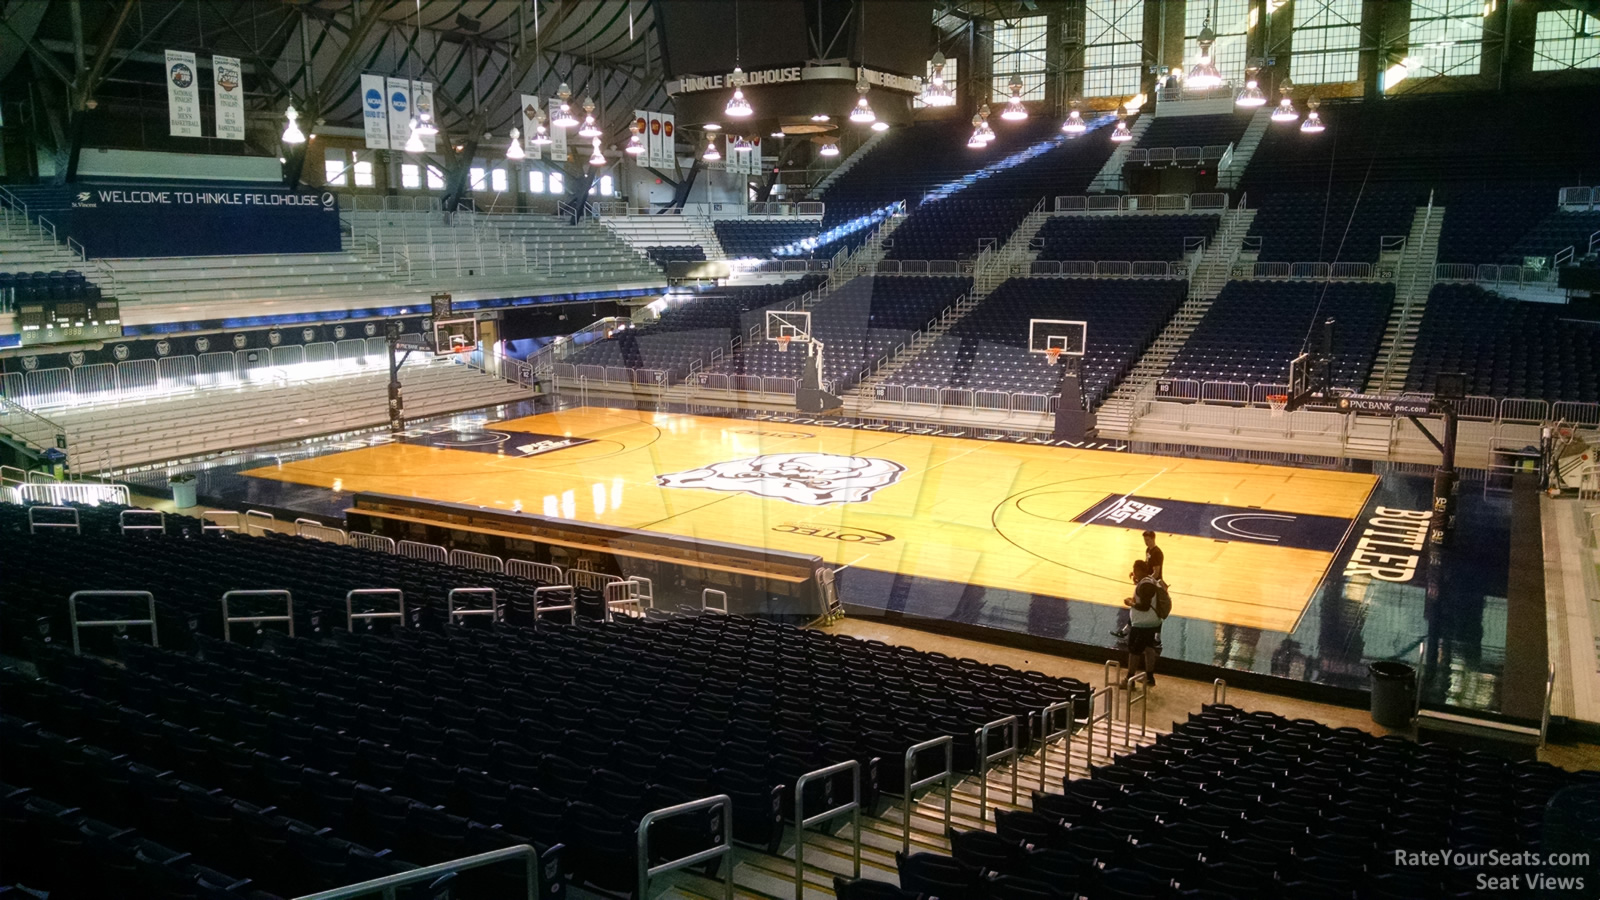 section 204, row 3 seat view  - hinkle fieldhouse